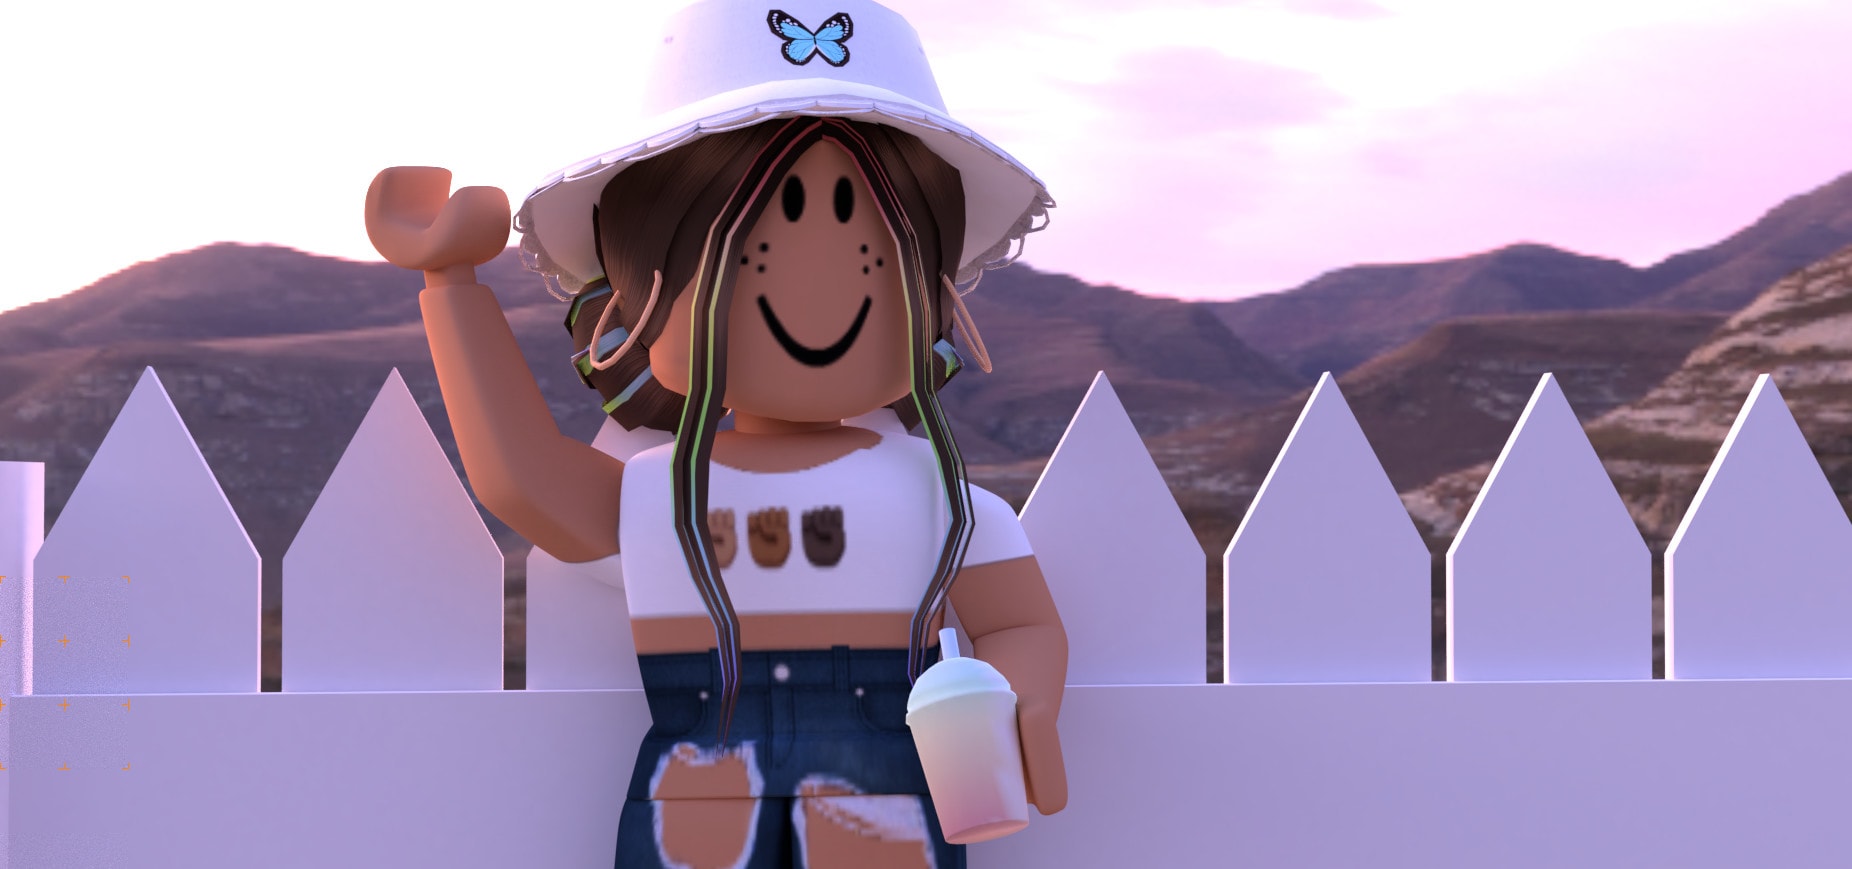 Make An Aesthetic Roblox Gfx By Mxylea - aesthetic roblox studio builds